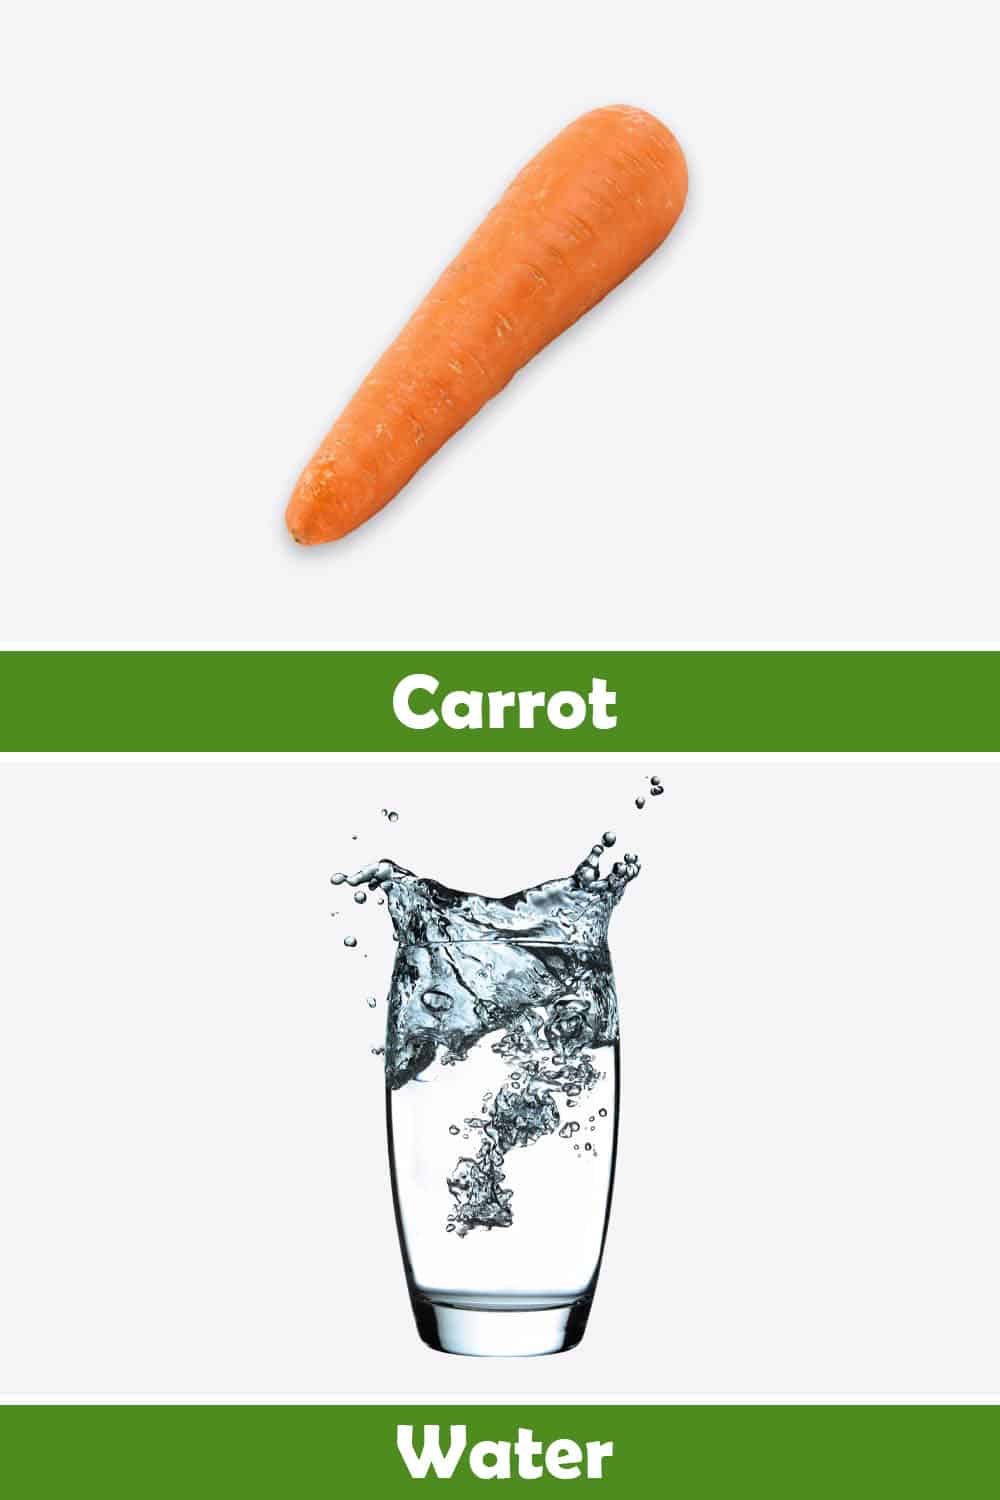 CARROT AND WATER